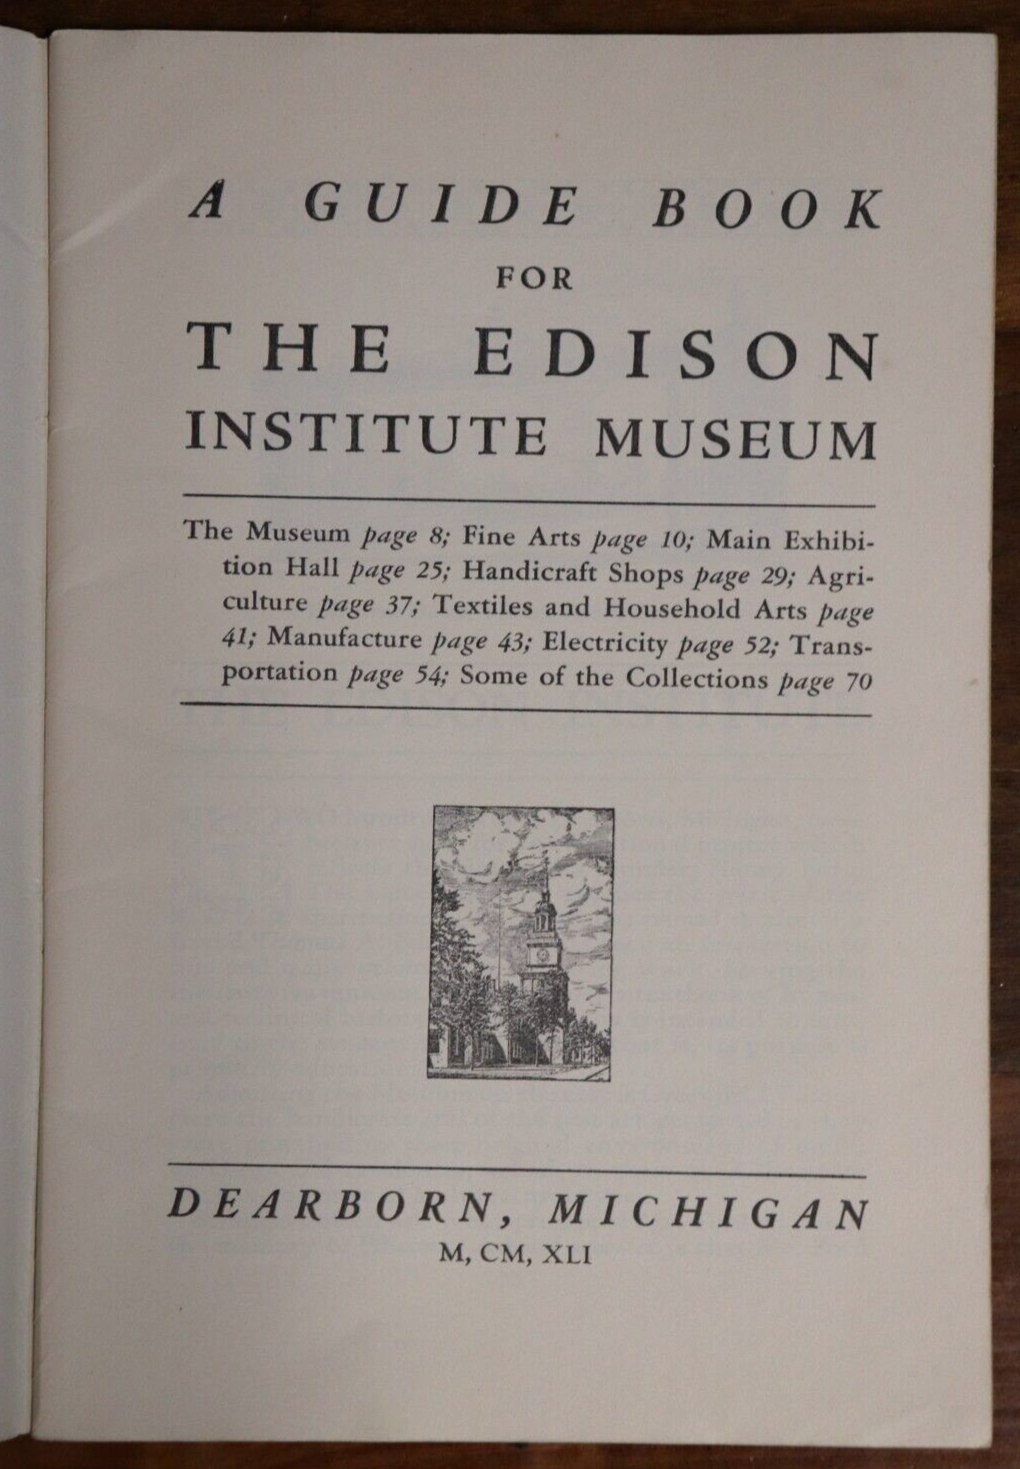 A Guide Book For The Edison Institute Museum - 1941 - American History Book - 0